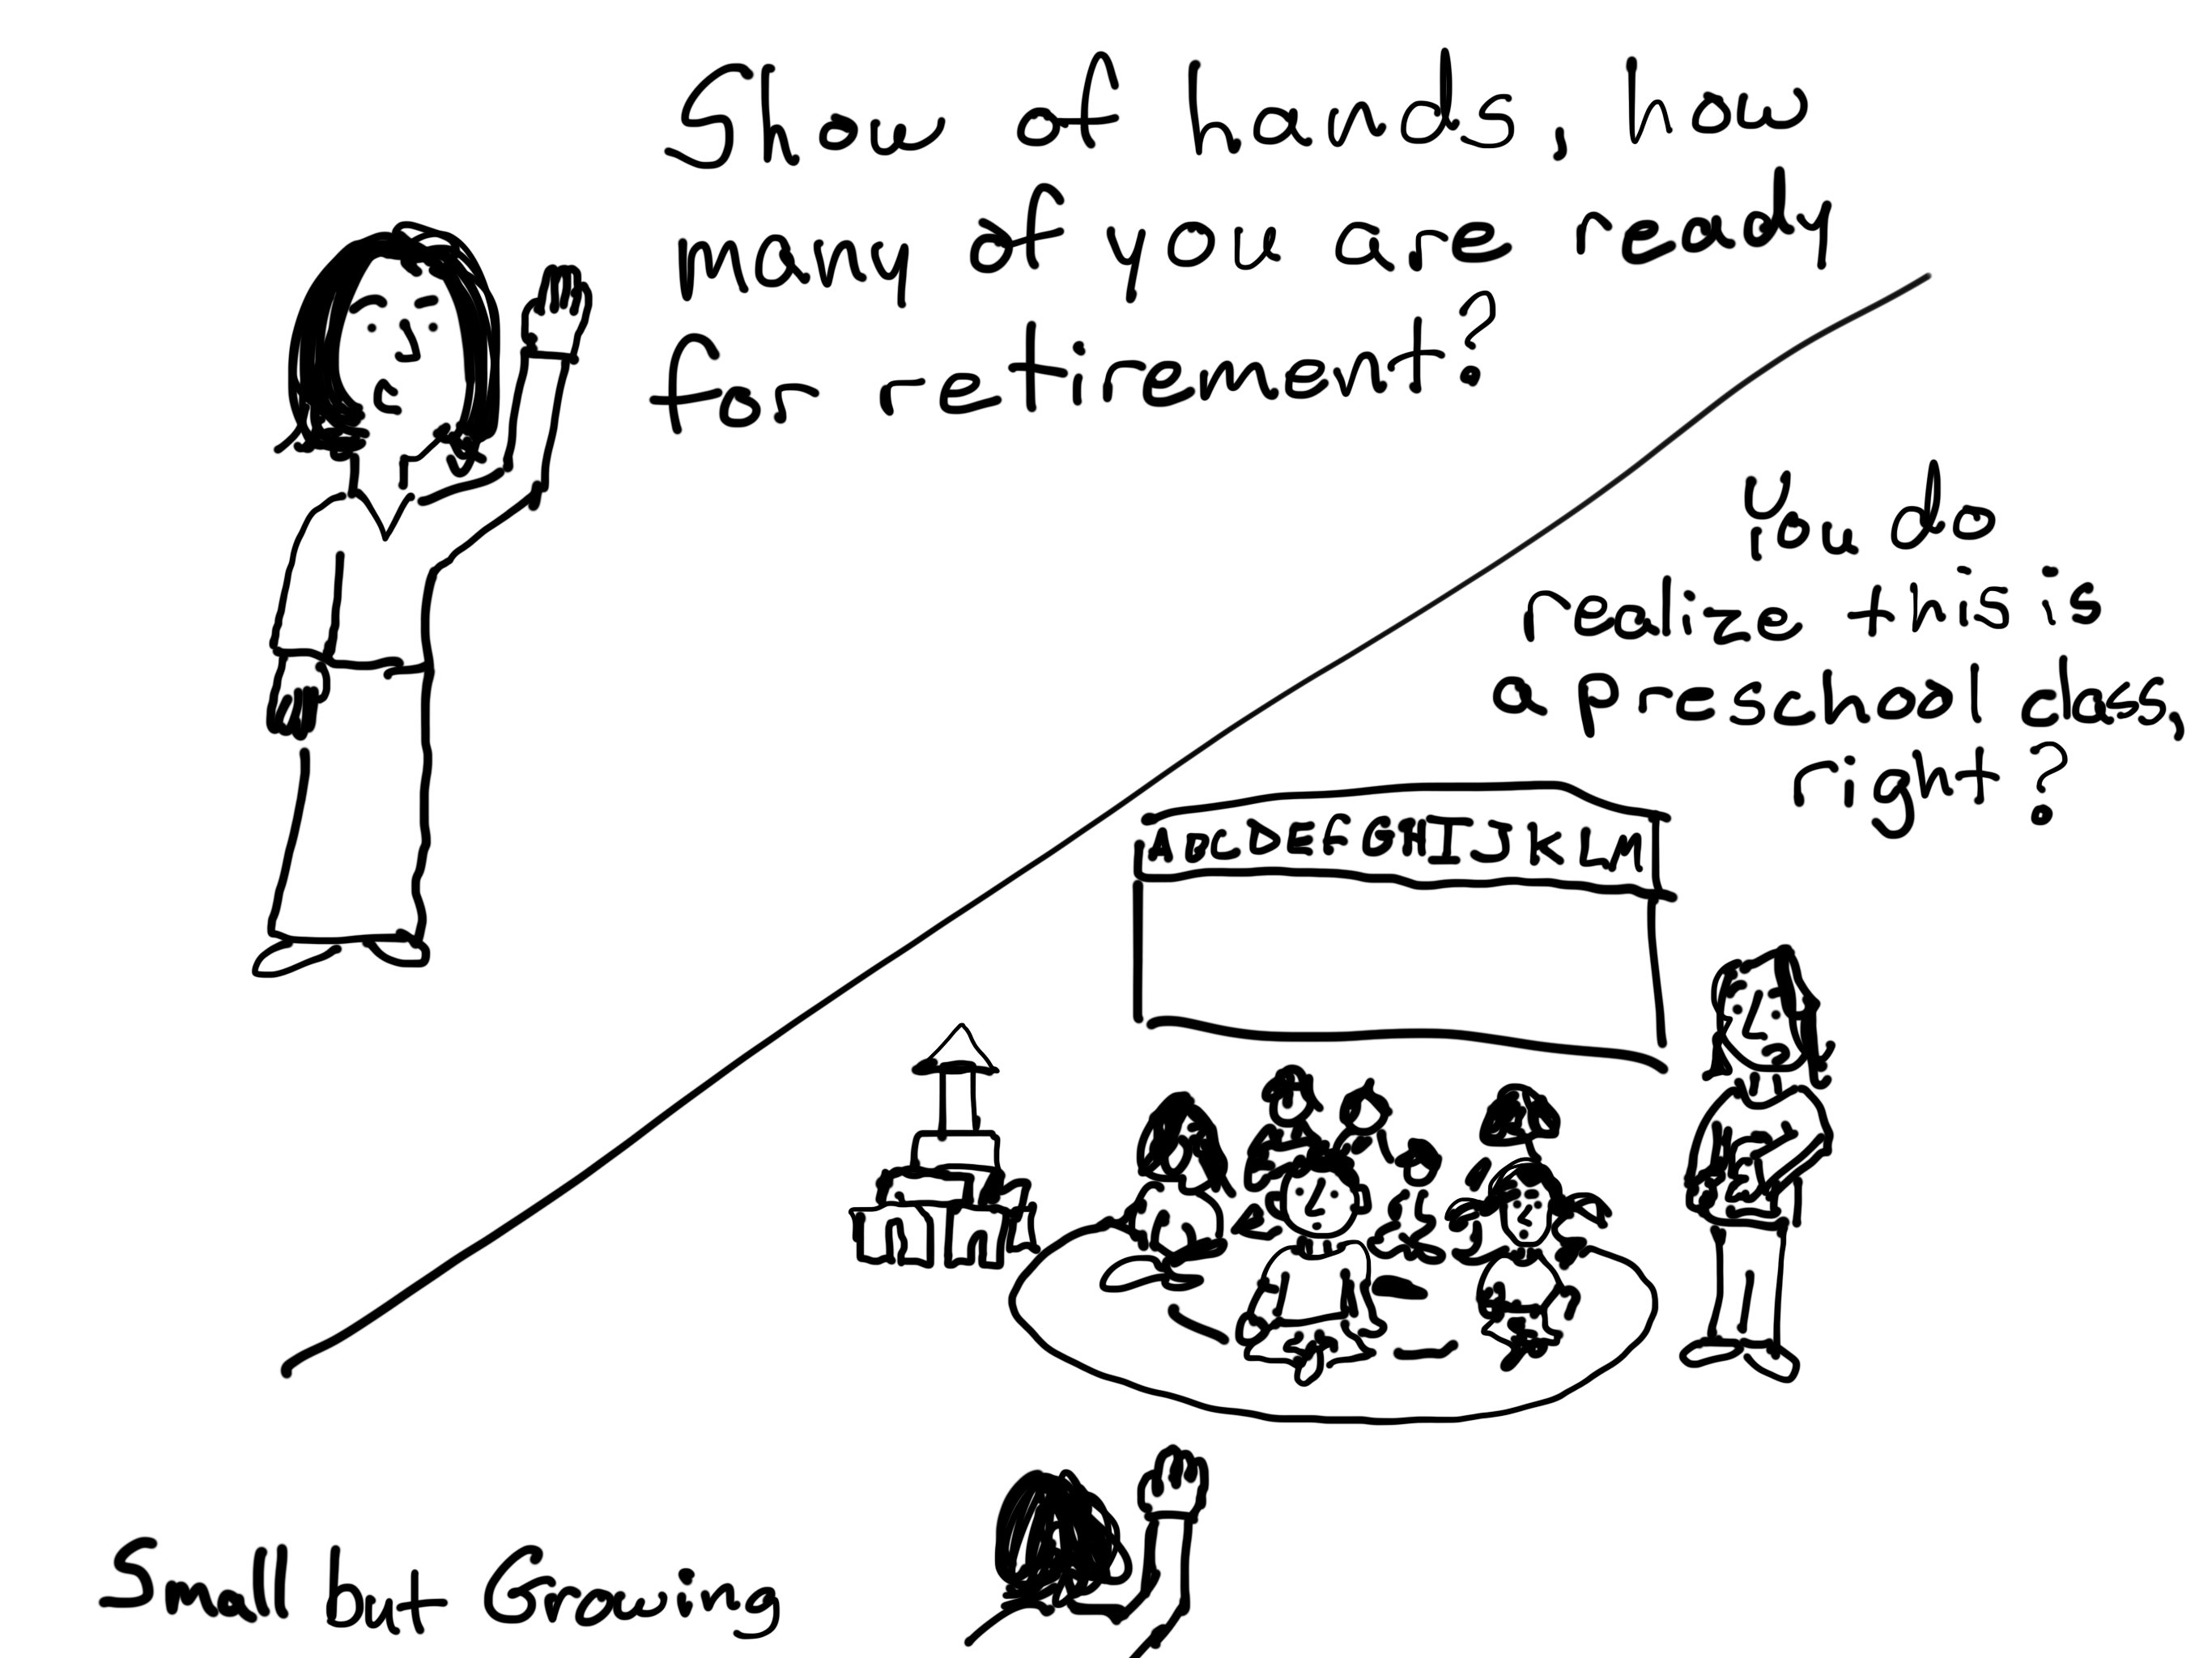 Show of hands, how many of you are ready for retirement? You do realize this is a preschool, right?